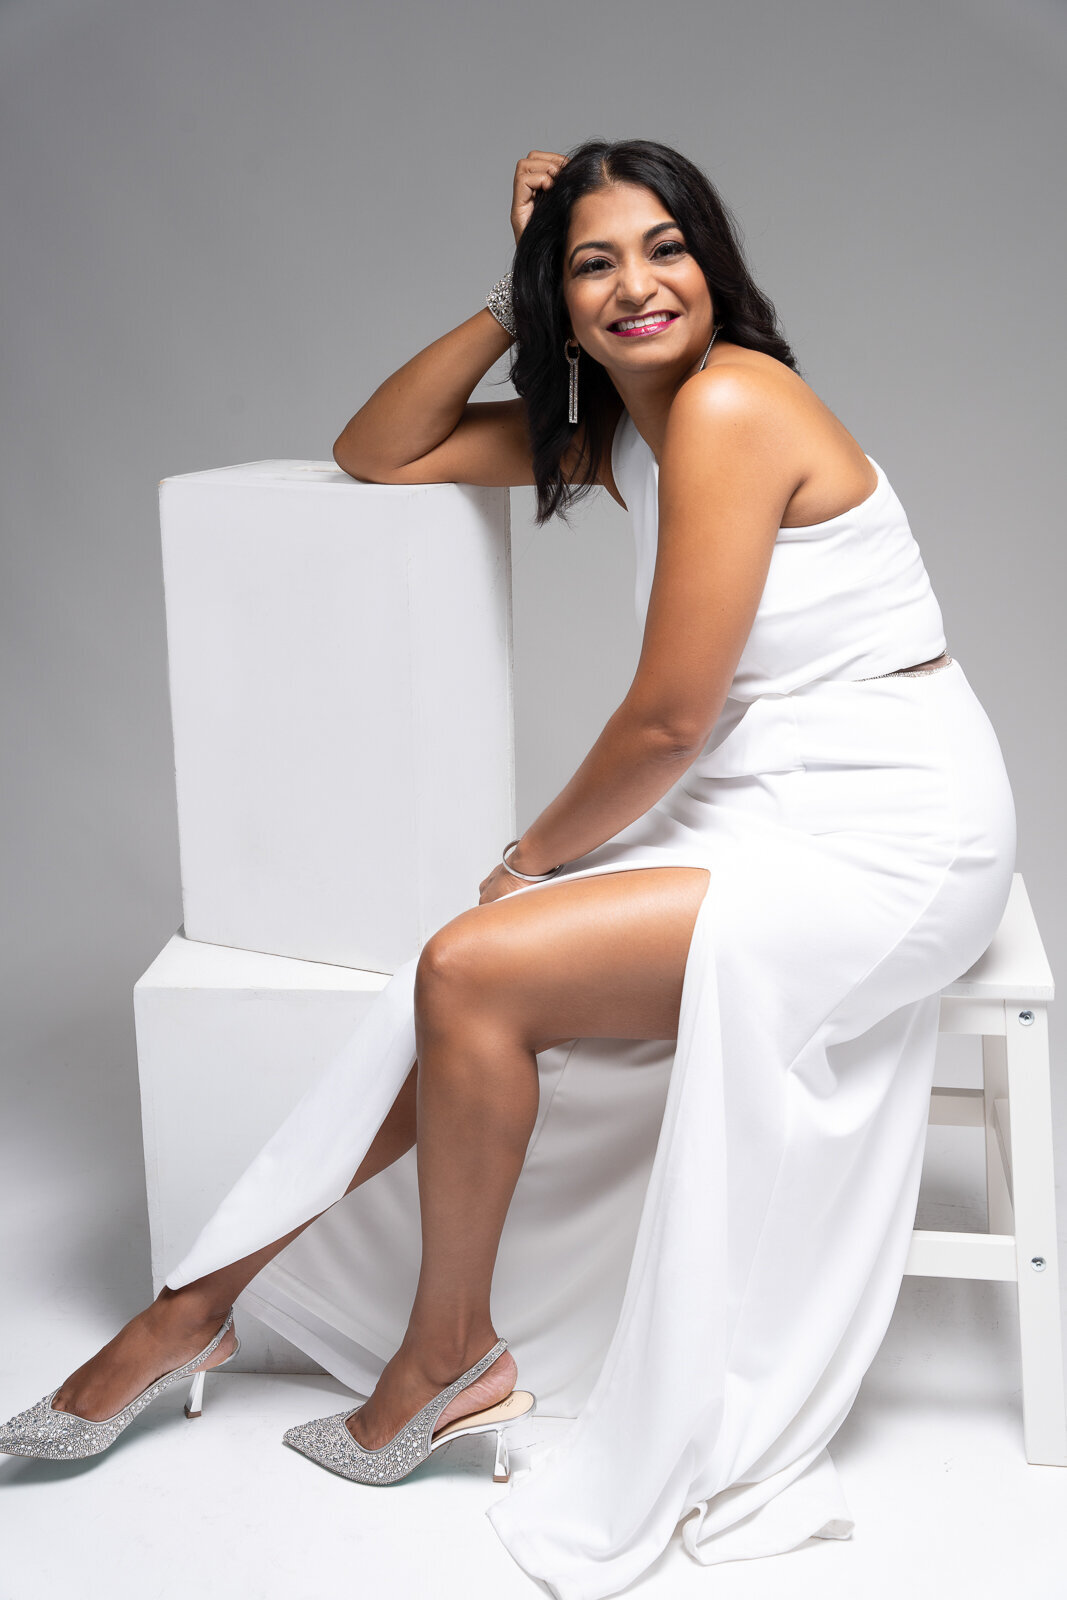 A picture of a woman smiling with a white dress with her arm on white boxes and siting on a white chair